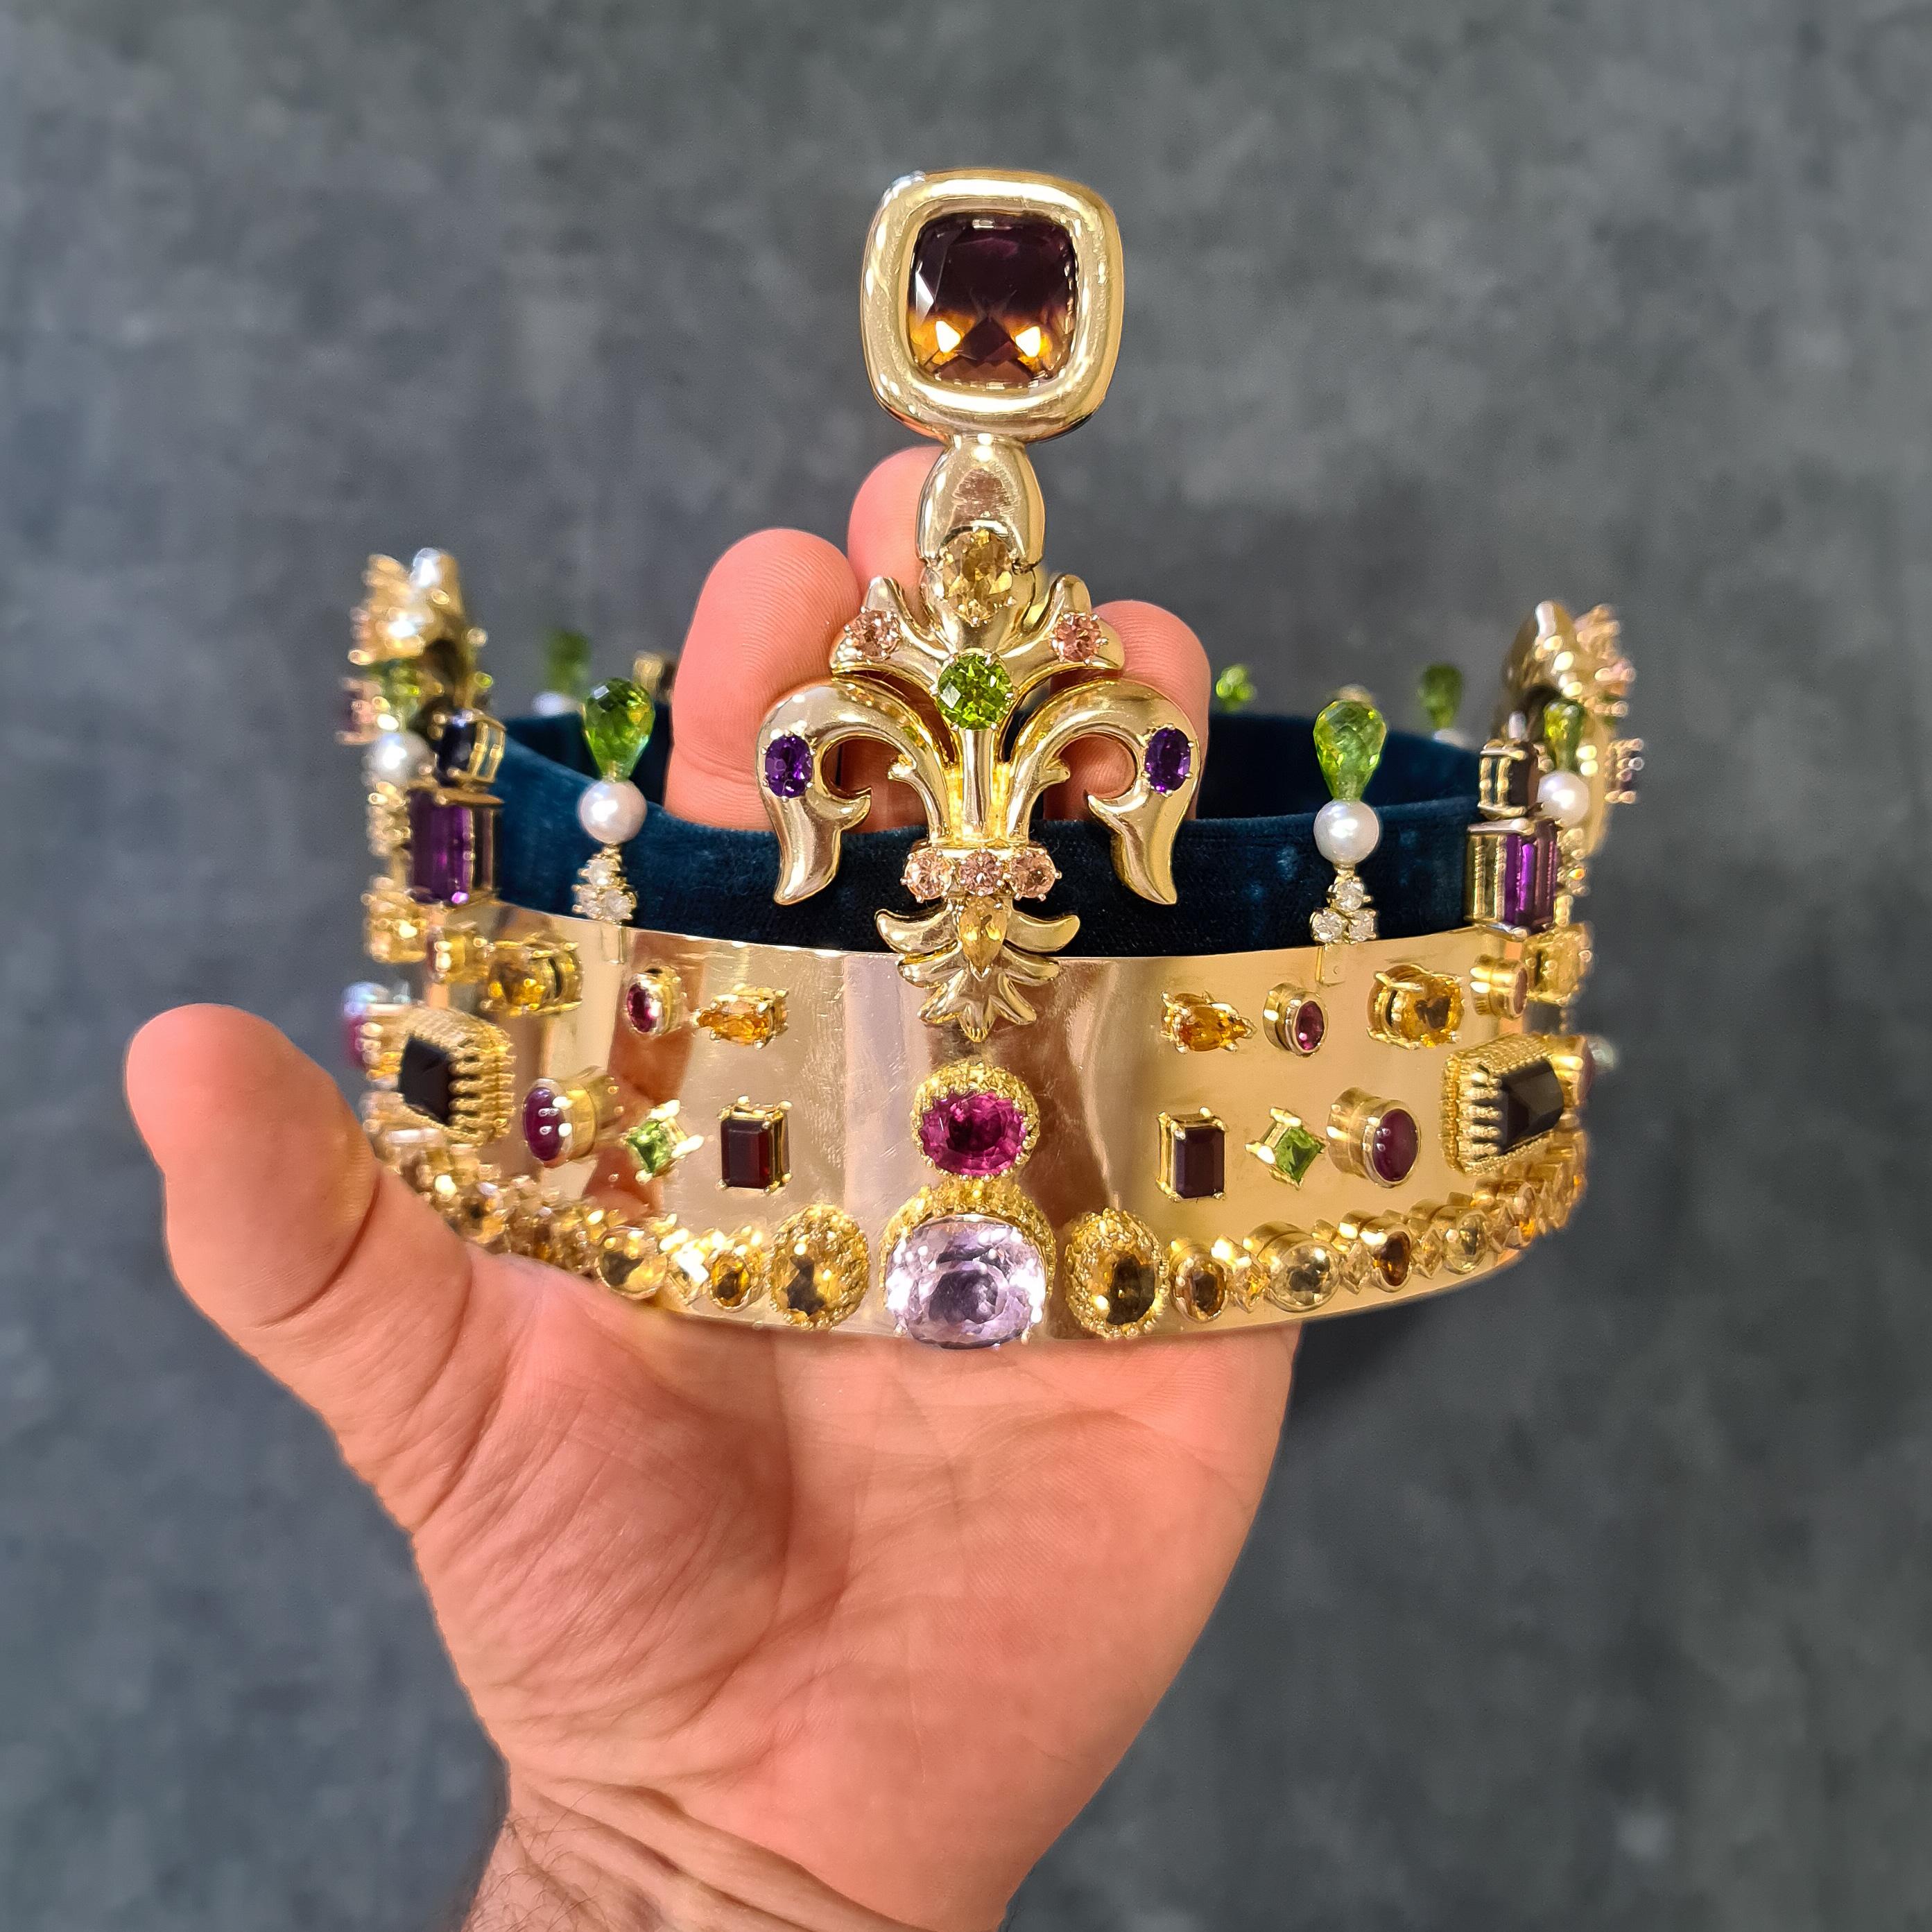 An astonishing 18ct gold coronet featuring a genuine cornucopia of gemstones. Fashioned in a solid 18-carat gold band, with a border of bezel-set citrines and topaz of various cuts and various gems throughout. Lined with forest-green velvet.